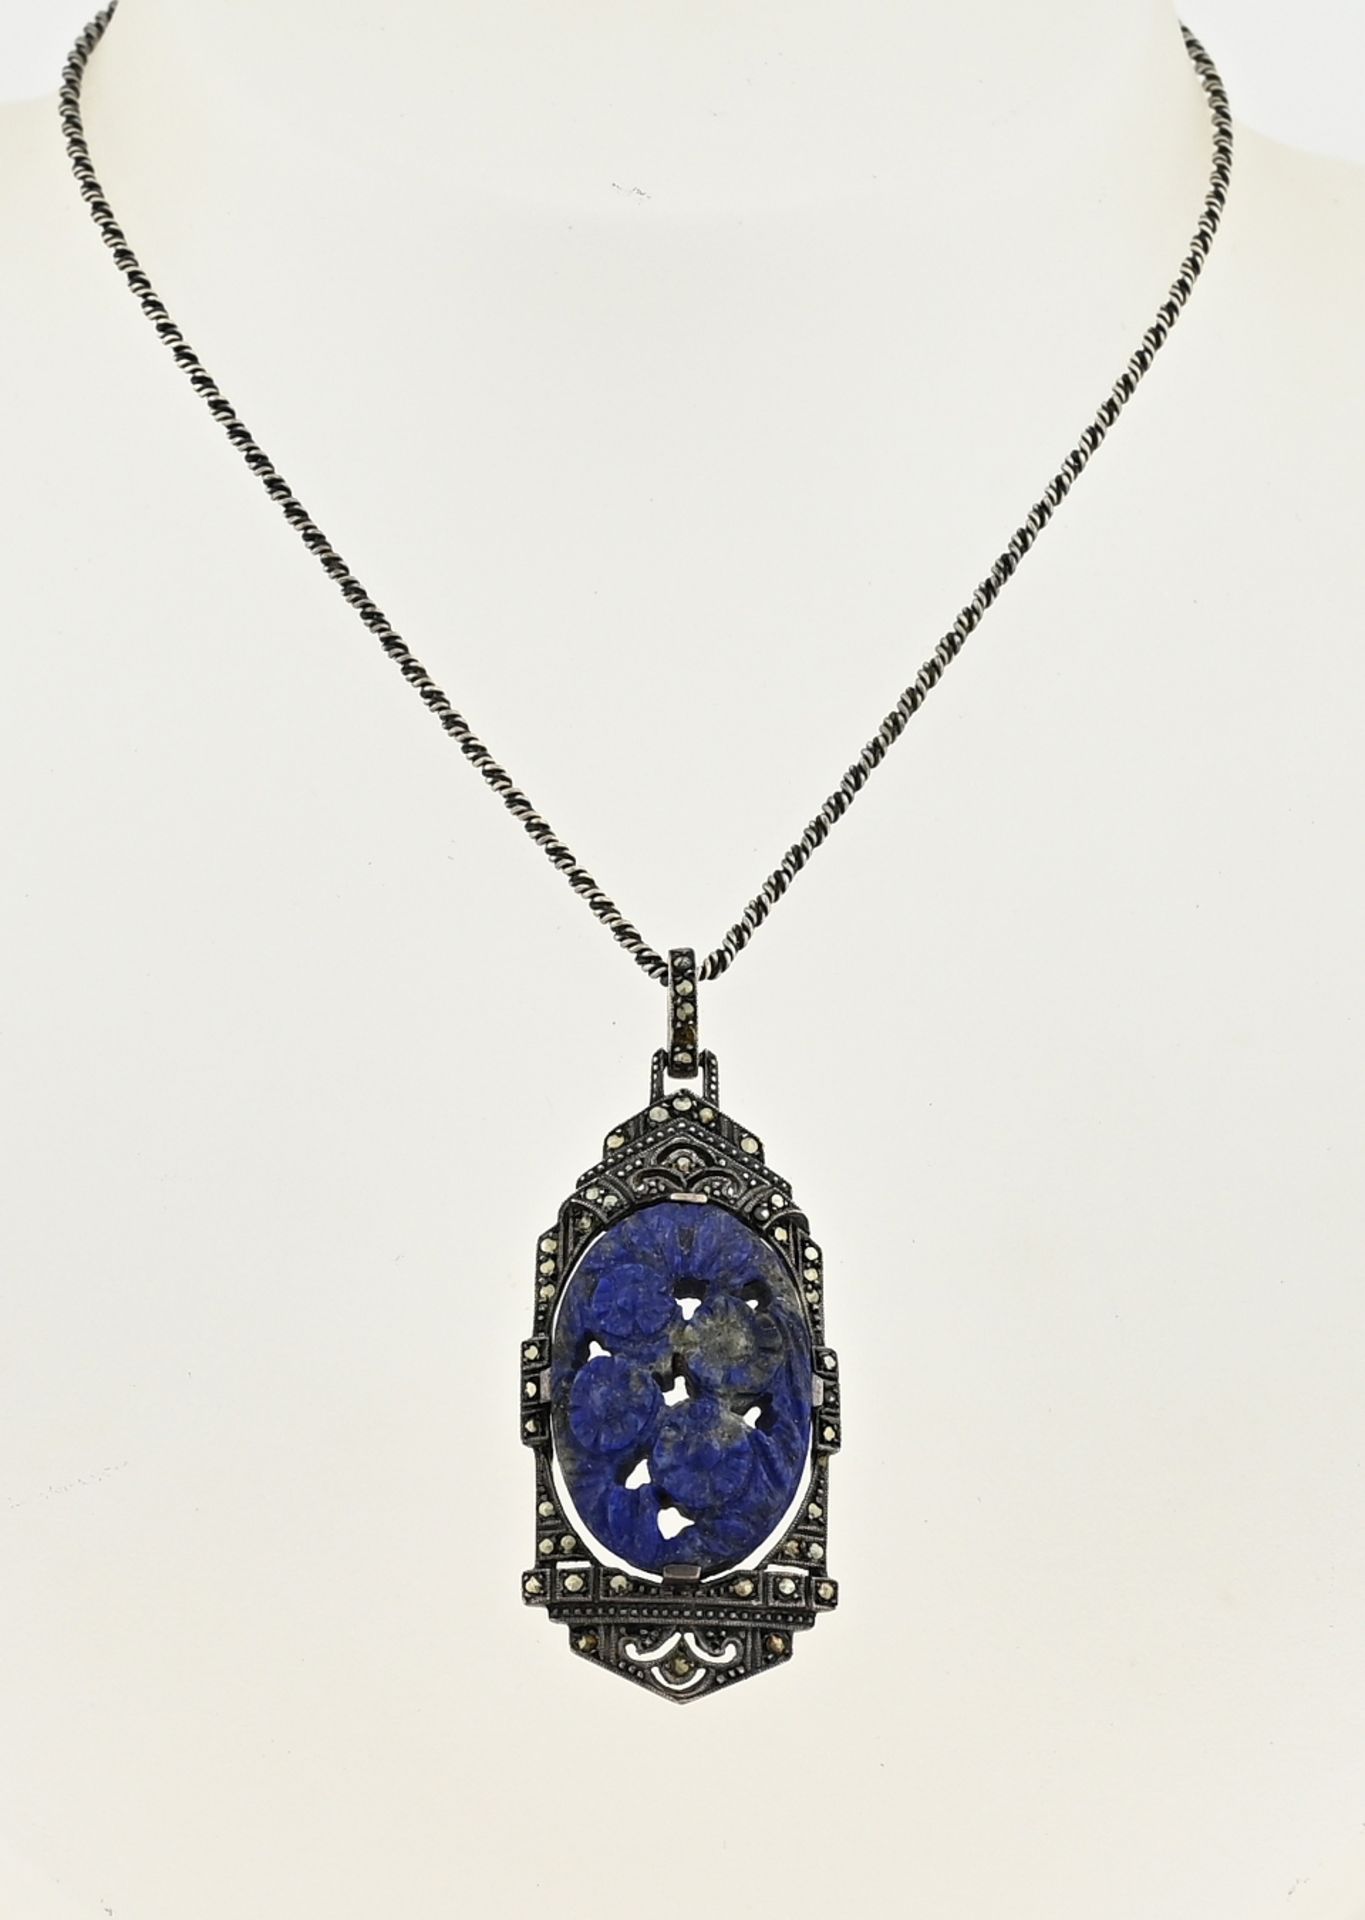 Silver necklace and pendant with lapis